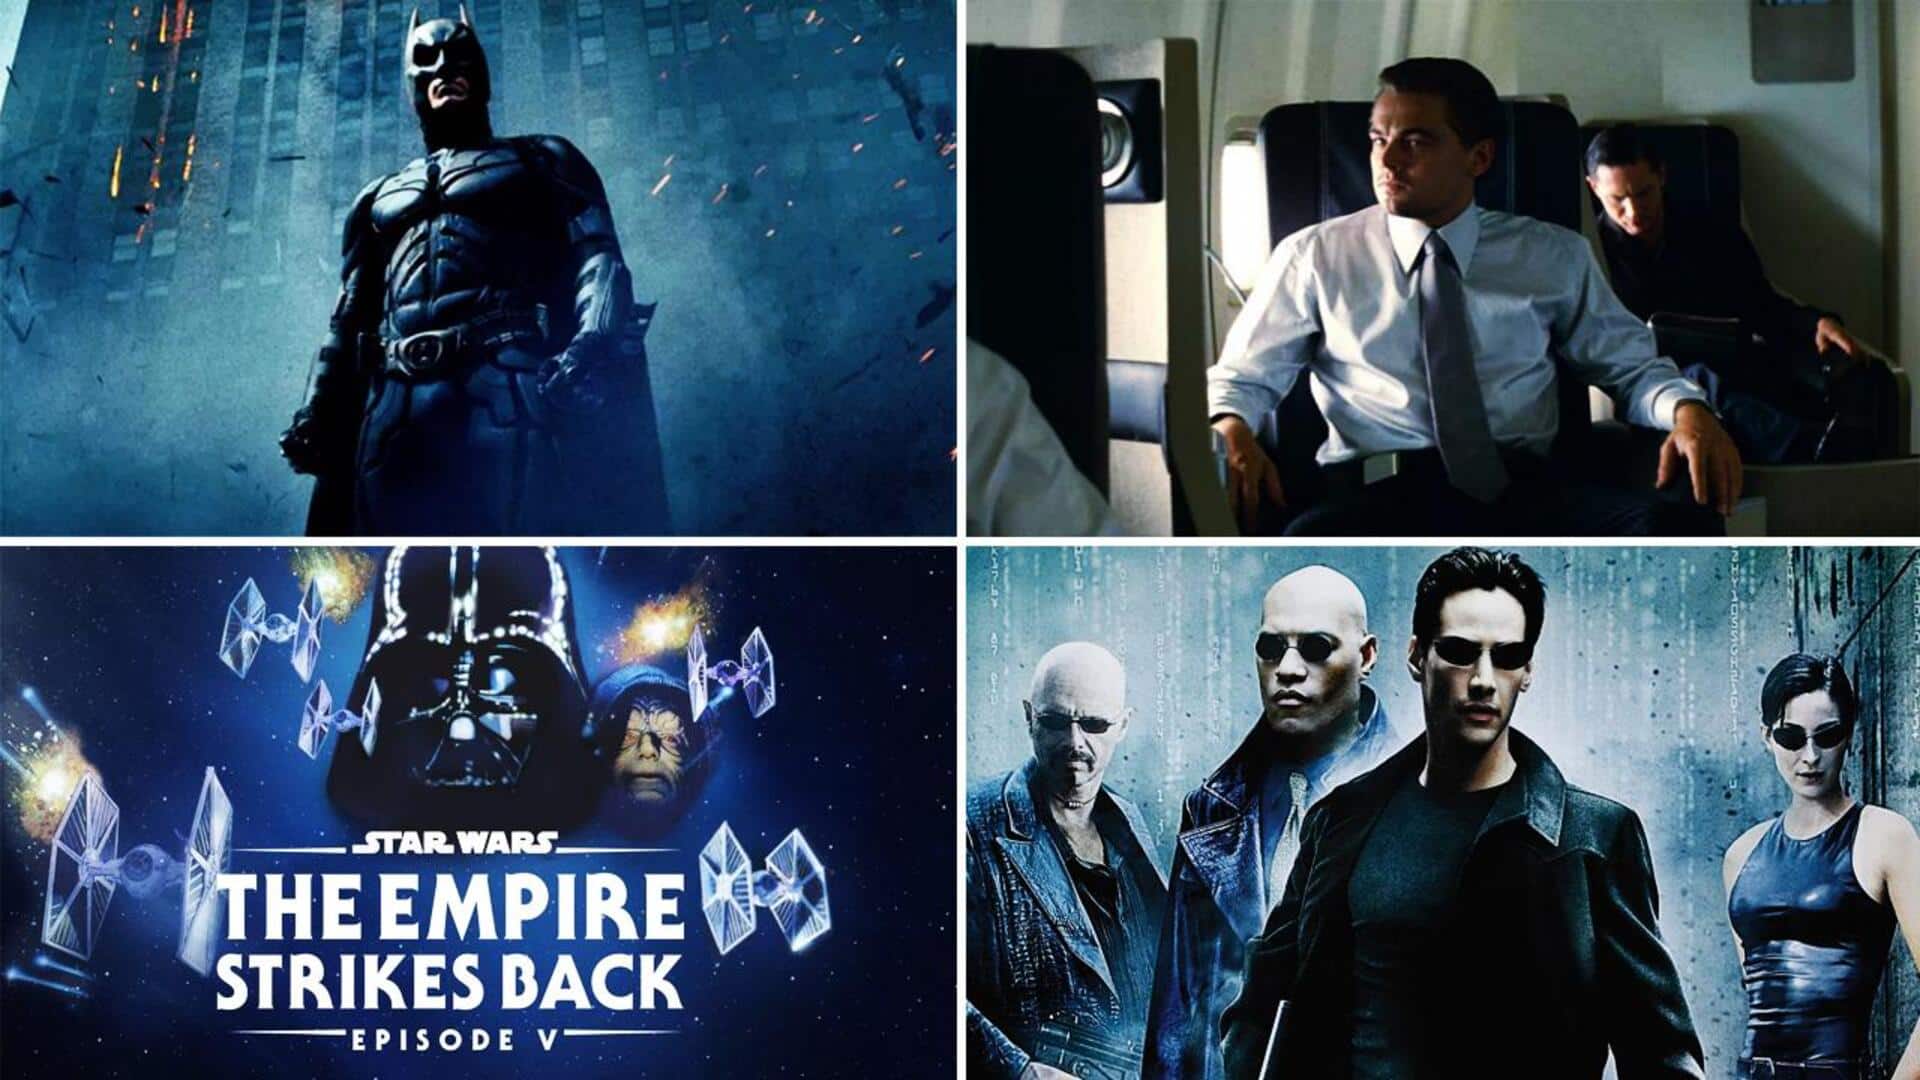 'The Dark Knight' to 'Terminator 2': Best IMDb-rated action movies